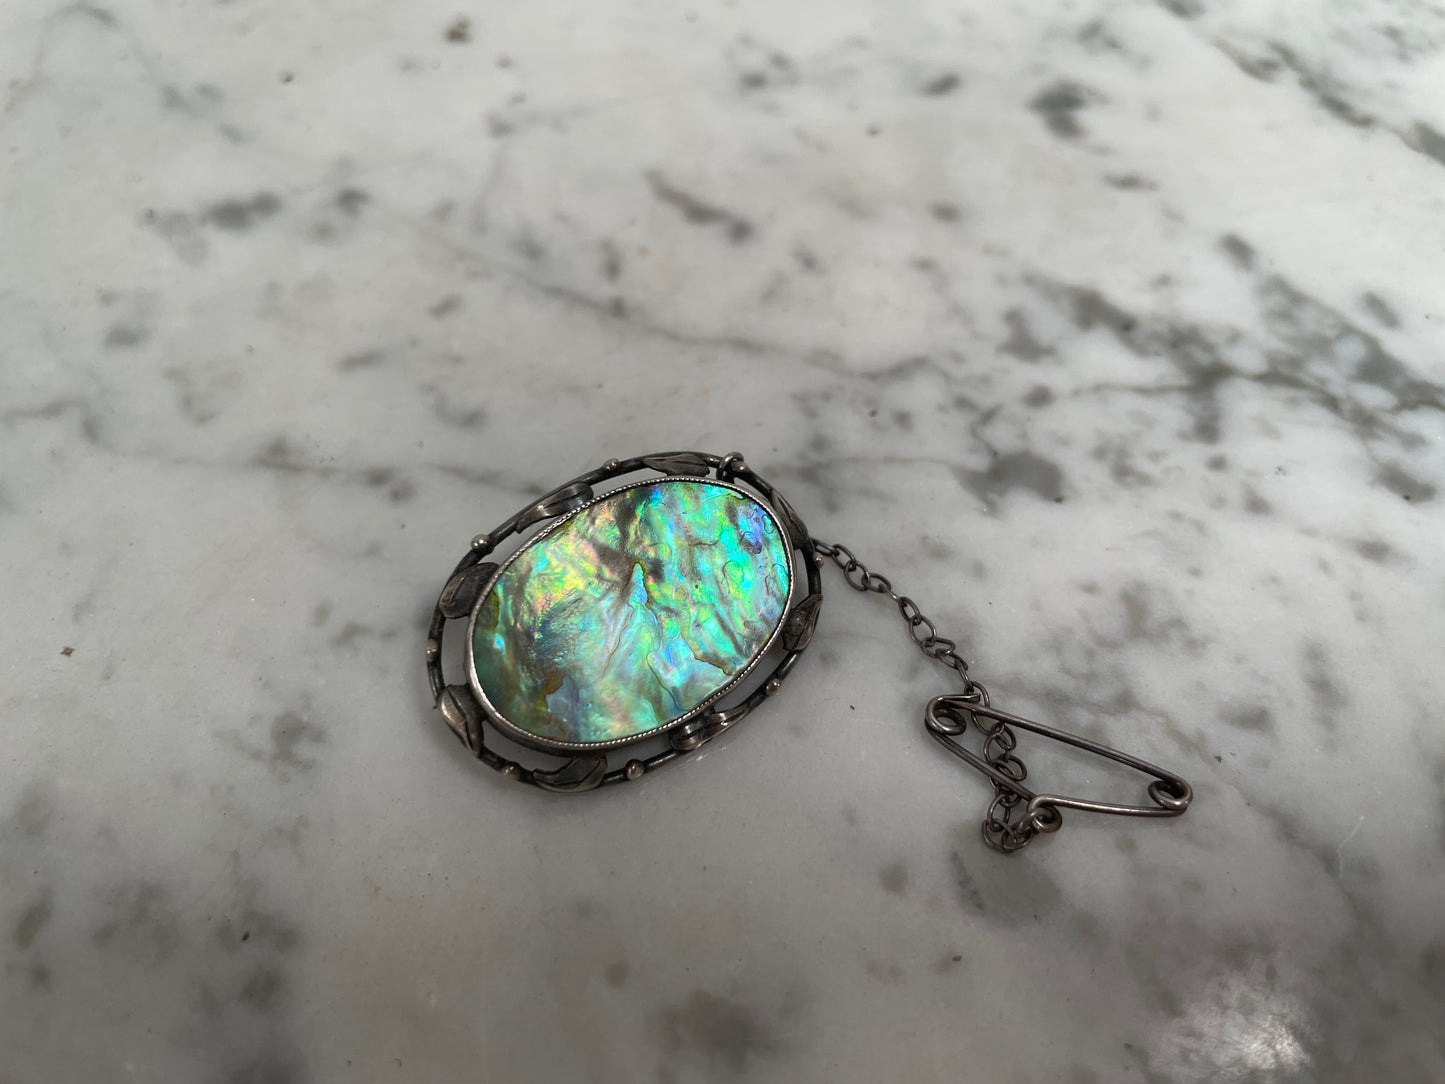 Antique Silver & Abalone Shell Brooch